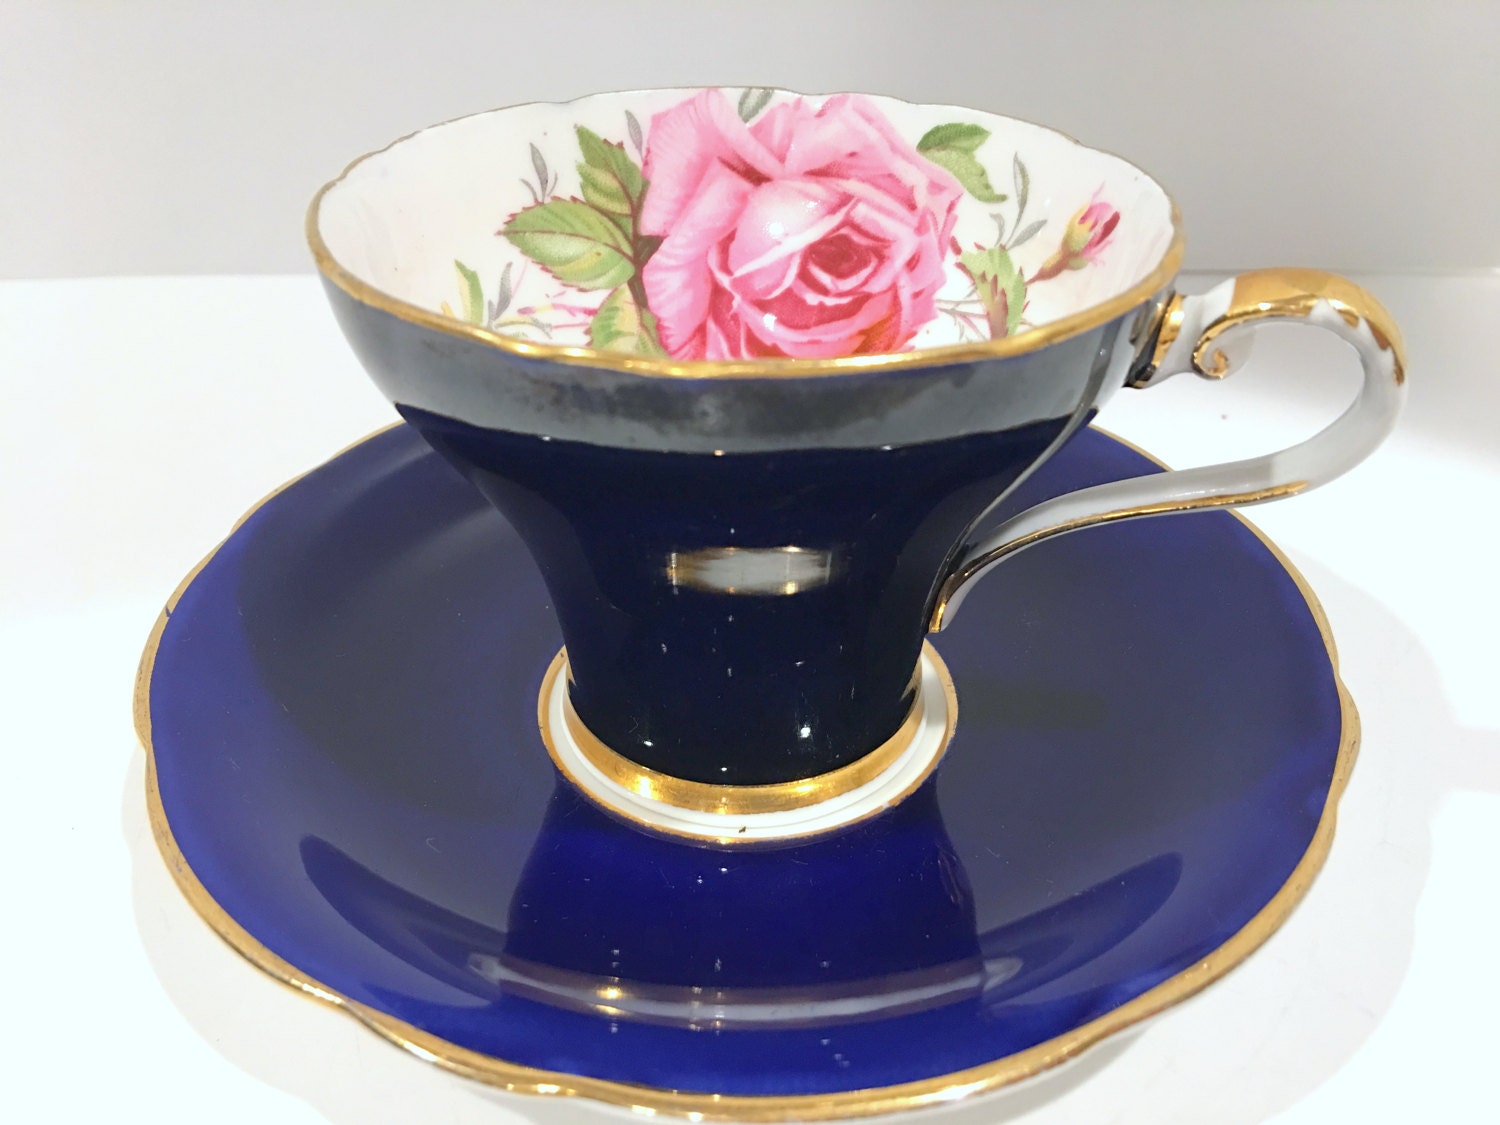 STANLEY tea cup and saucer pink rose painted baby blue color teacup England  50s